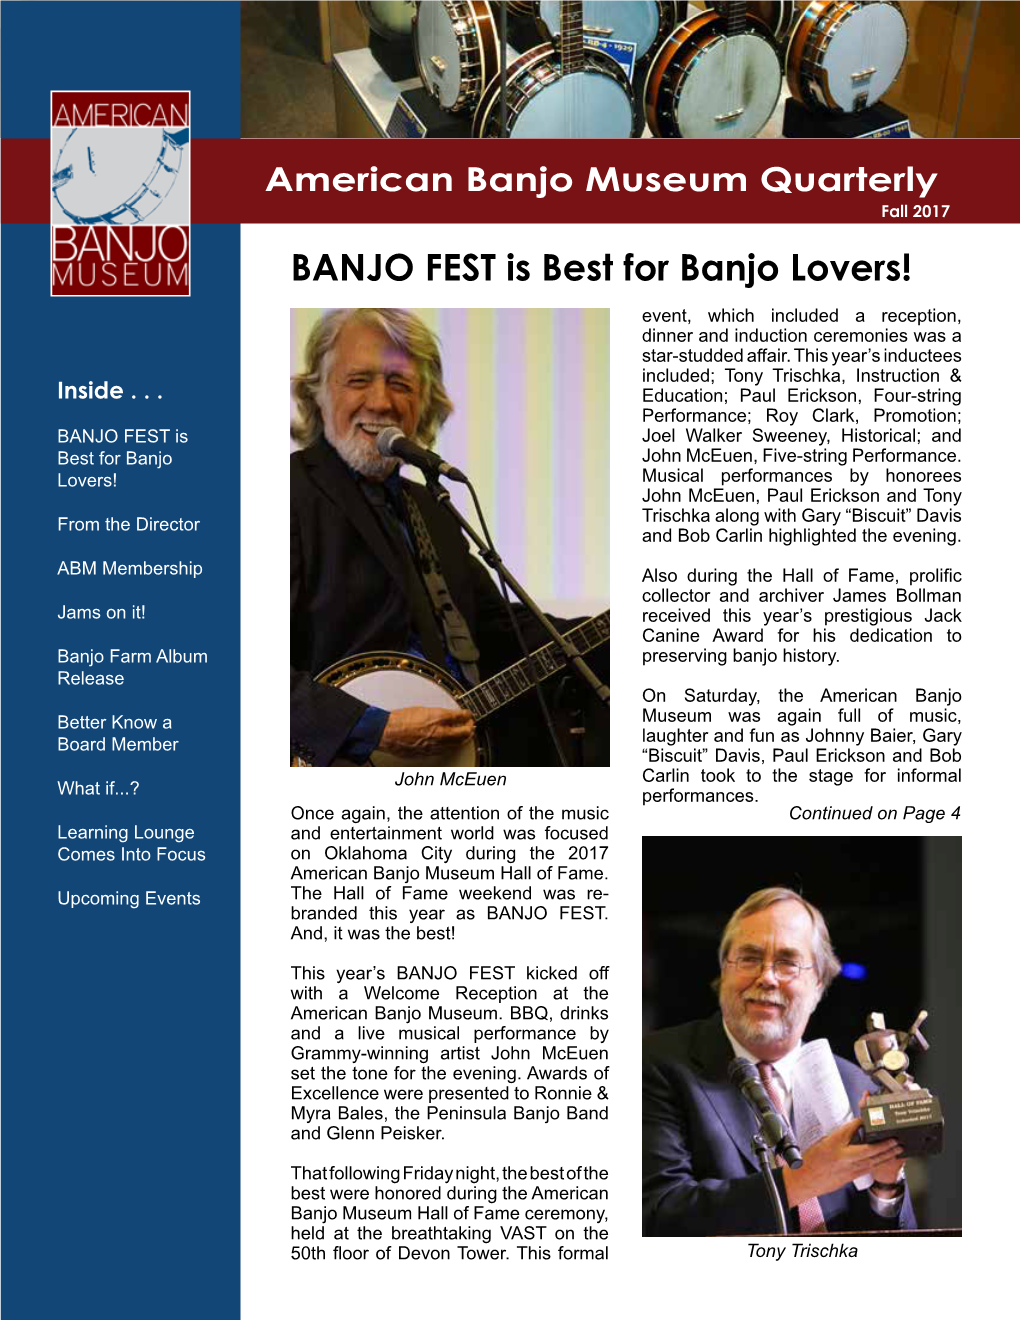 BANJO FEST Is Best for Banjo Lovers! Event, Which Included a Reception, Dinner and Induction Ceremonies Was a Star-Studded Affair